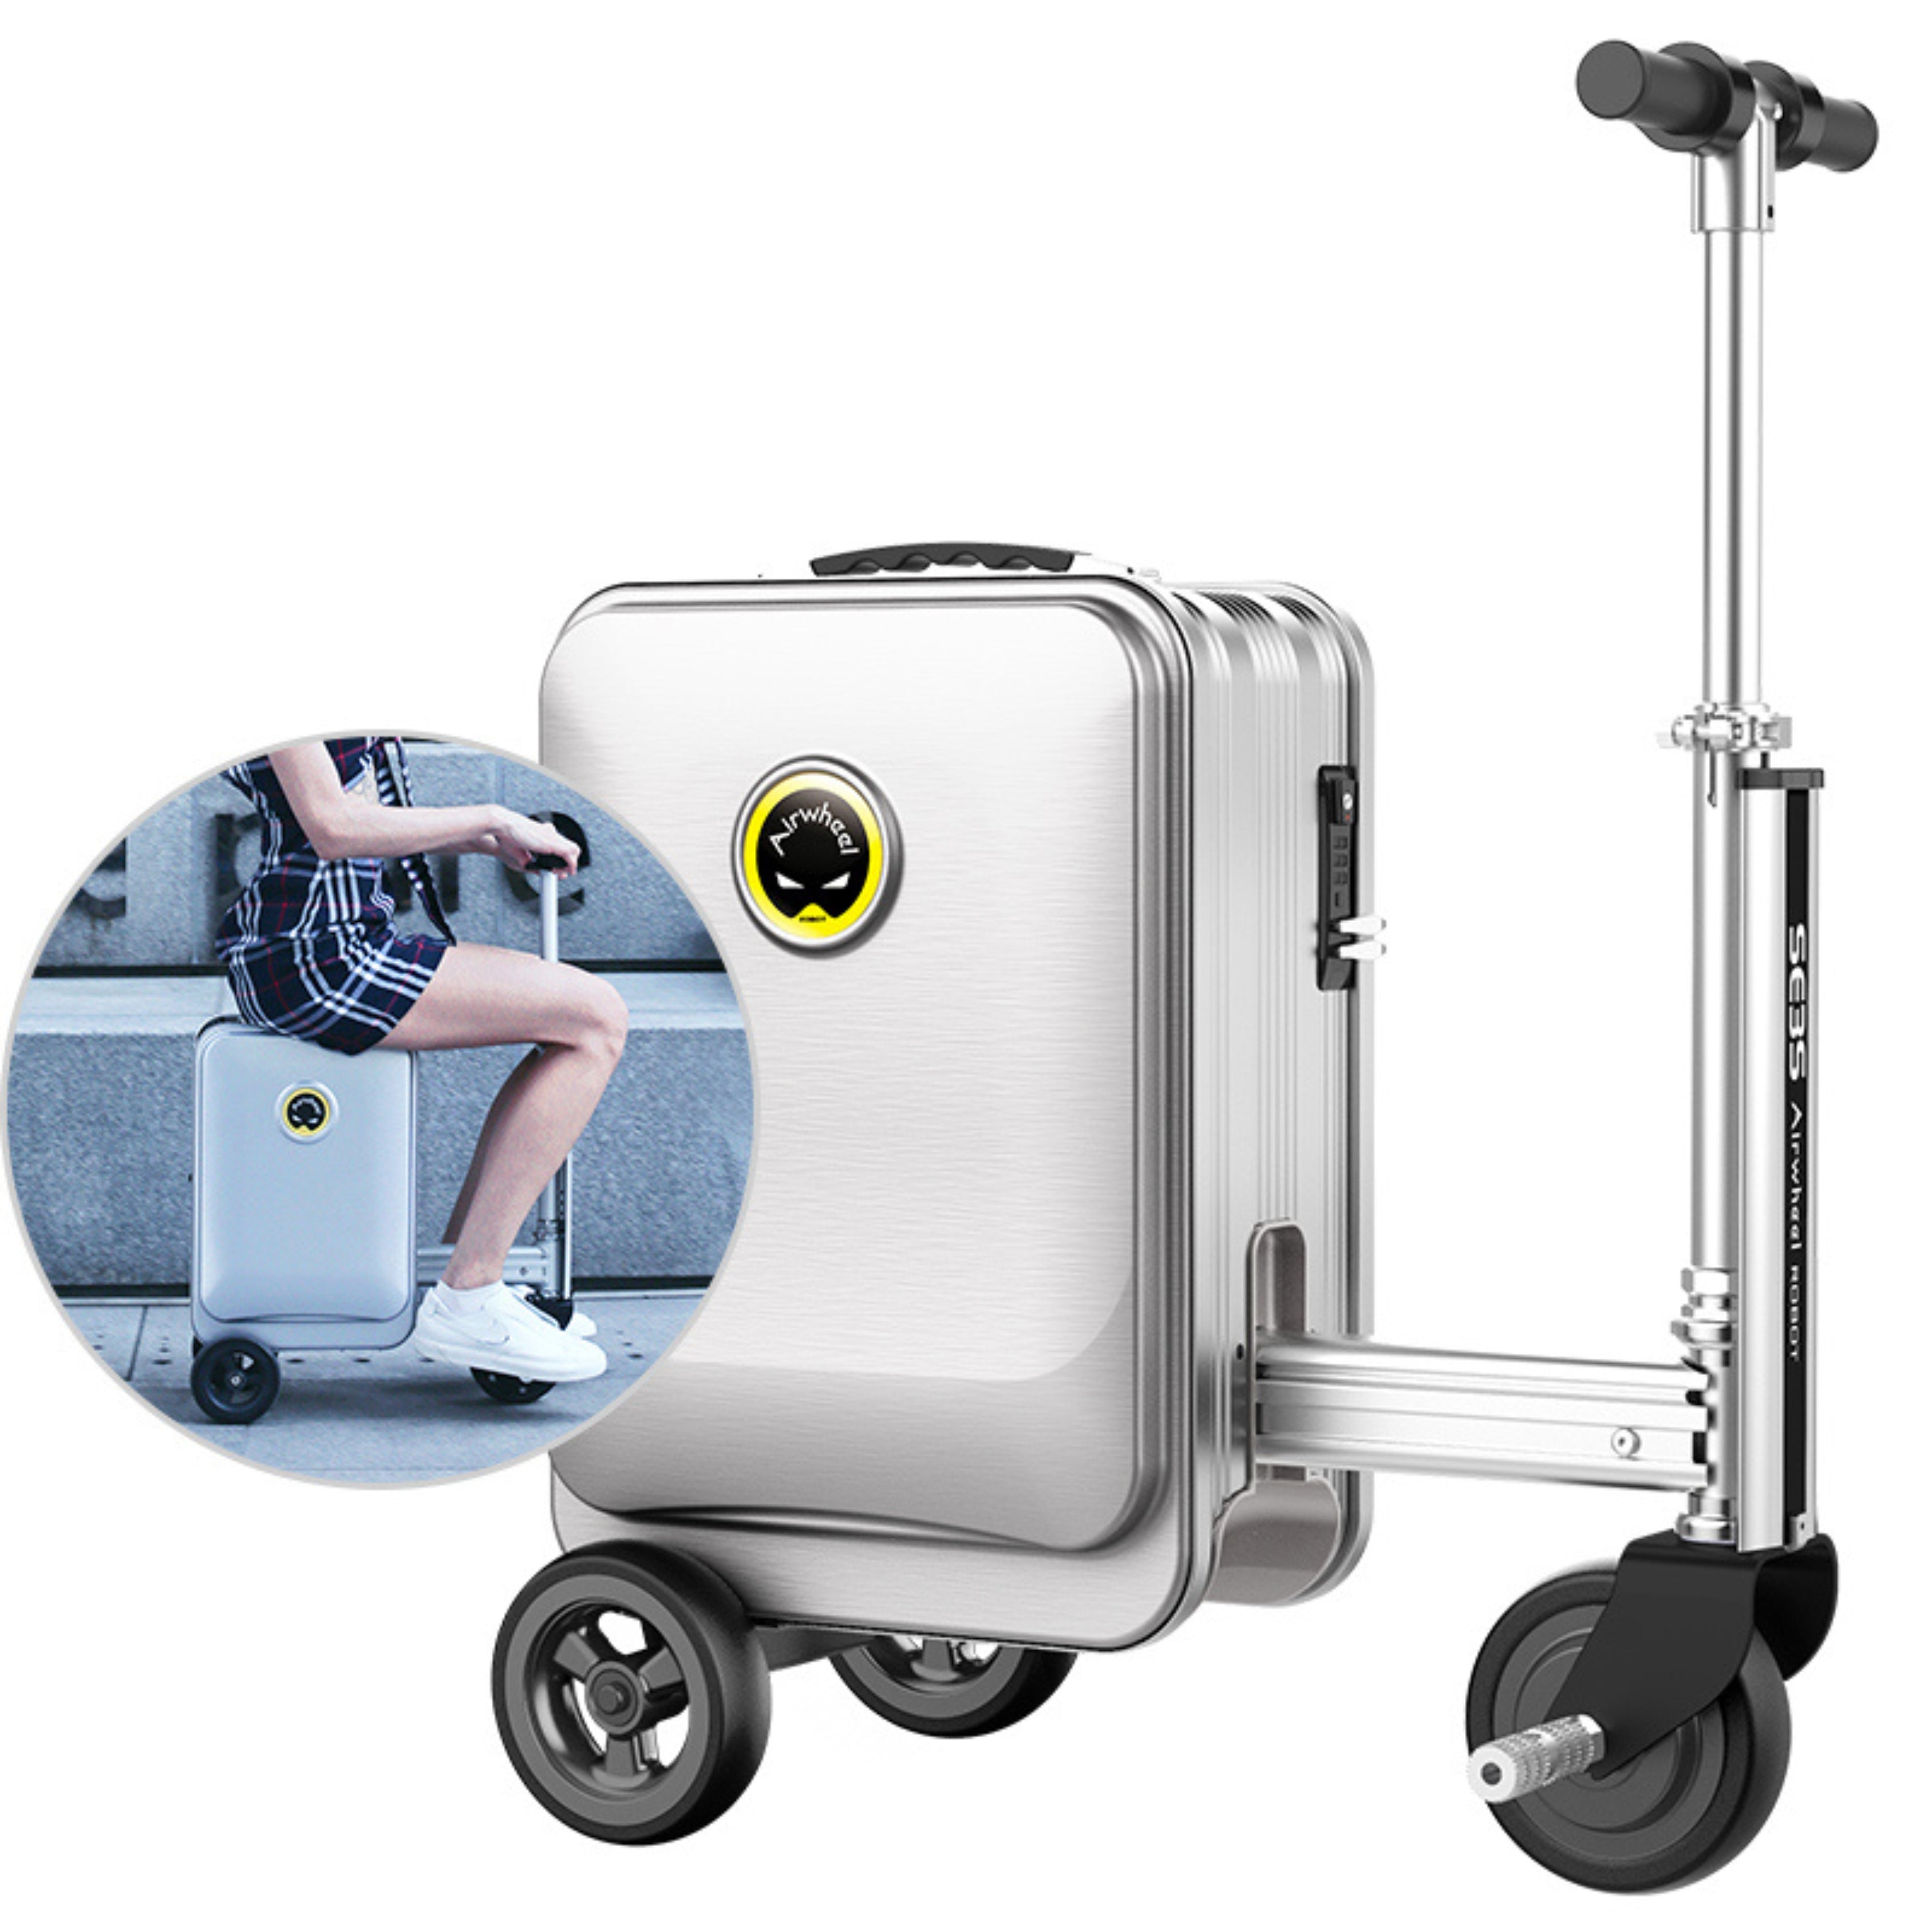 Airwheel - Airwheel SE3S, a riding smart luggage that upgrades the journey  experience(Chapter 2) Abstract: Besides the riding functions, we will check  more and see the what the Airwheel SE3S electric riding